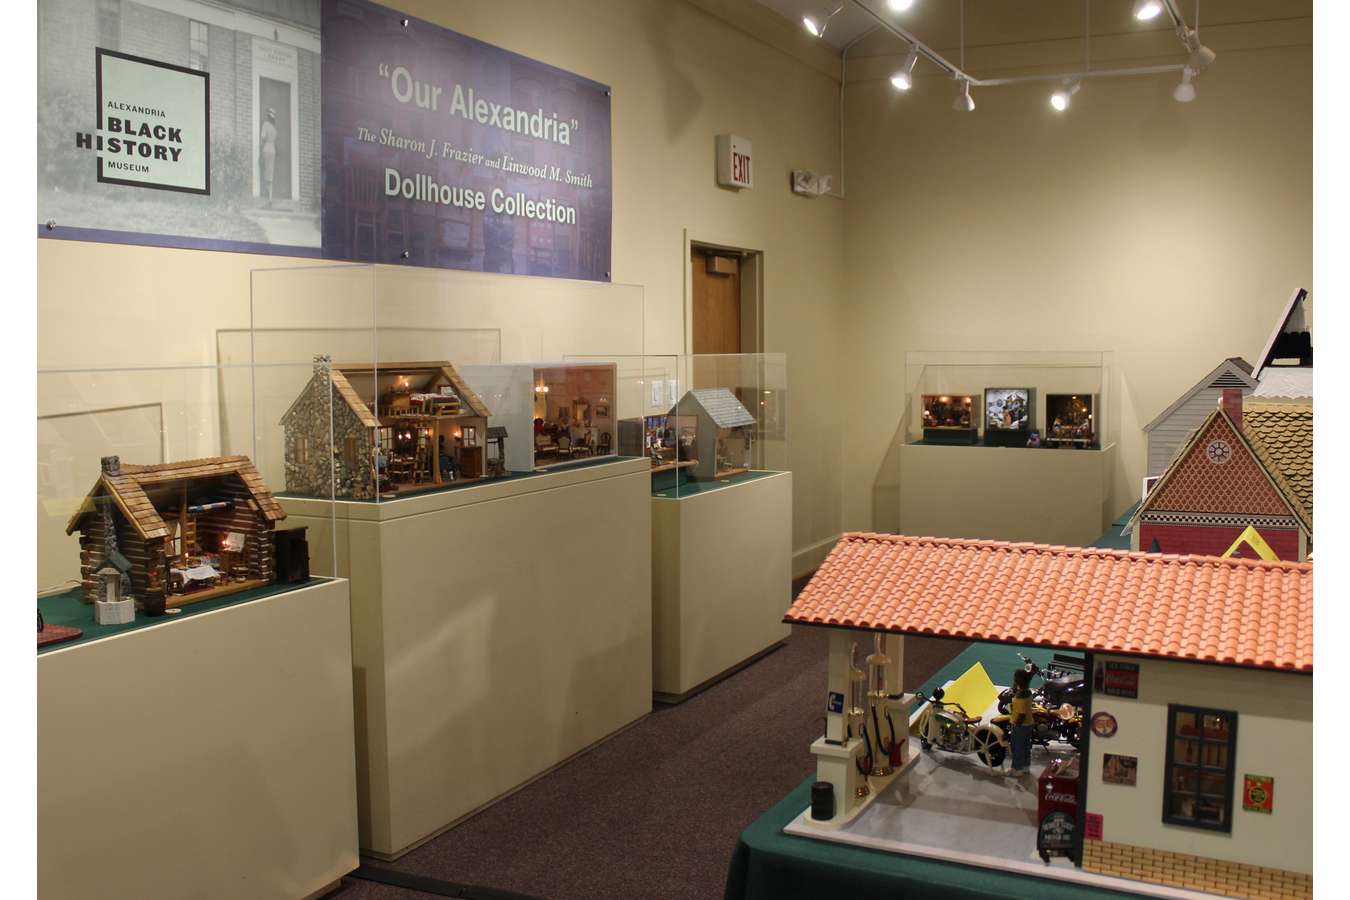 Cases : Thirty Miniature Homes and Building Recreate "Our Alexandria"